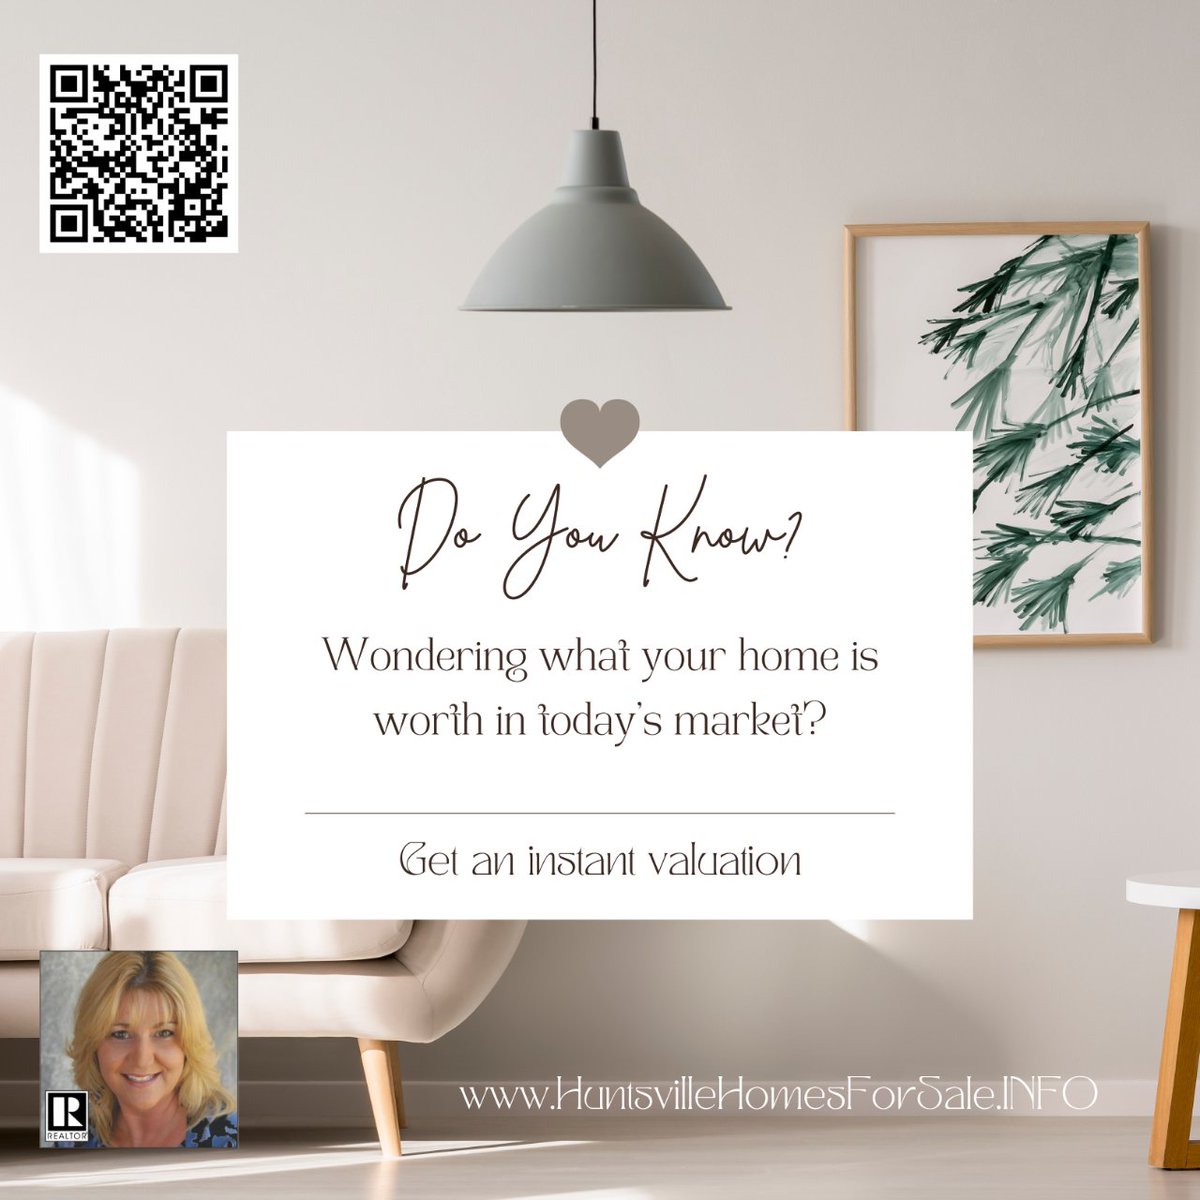 Ever wonder what your home is worth in today's market? Click the link for an instant valuation for your property. i.mtr.cool/svpppsbrdi #huntsvillehomesforsale #huntsville #rebekahroserealtor #remaxagent #homevaluehuntsville #whatsmyhomeworth #remaxunlimited #sellingmyhome